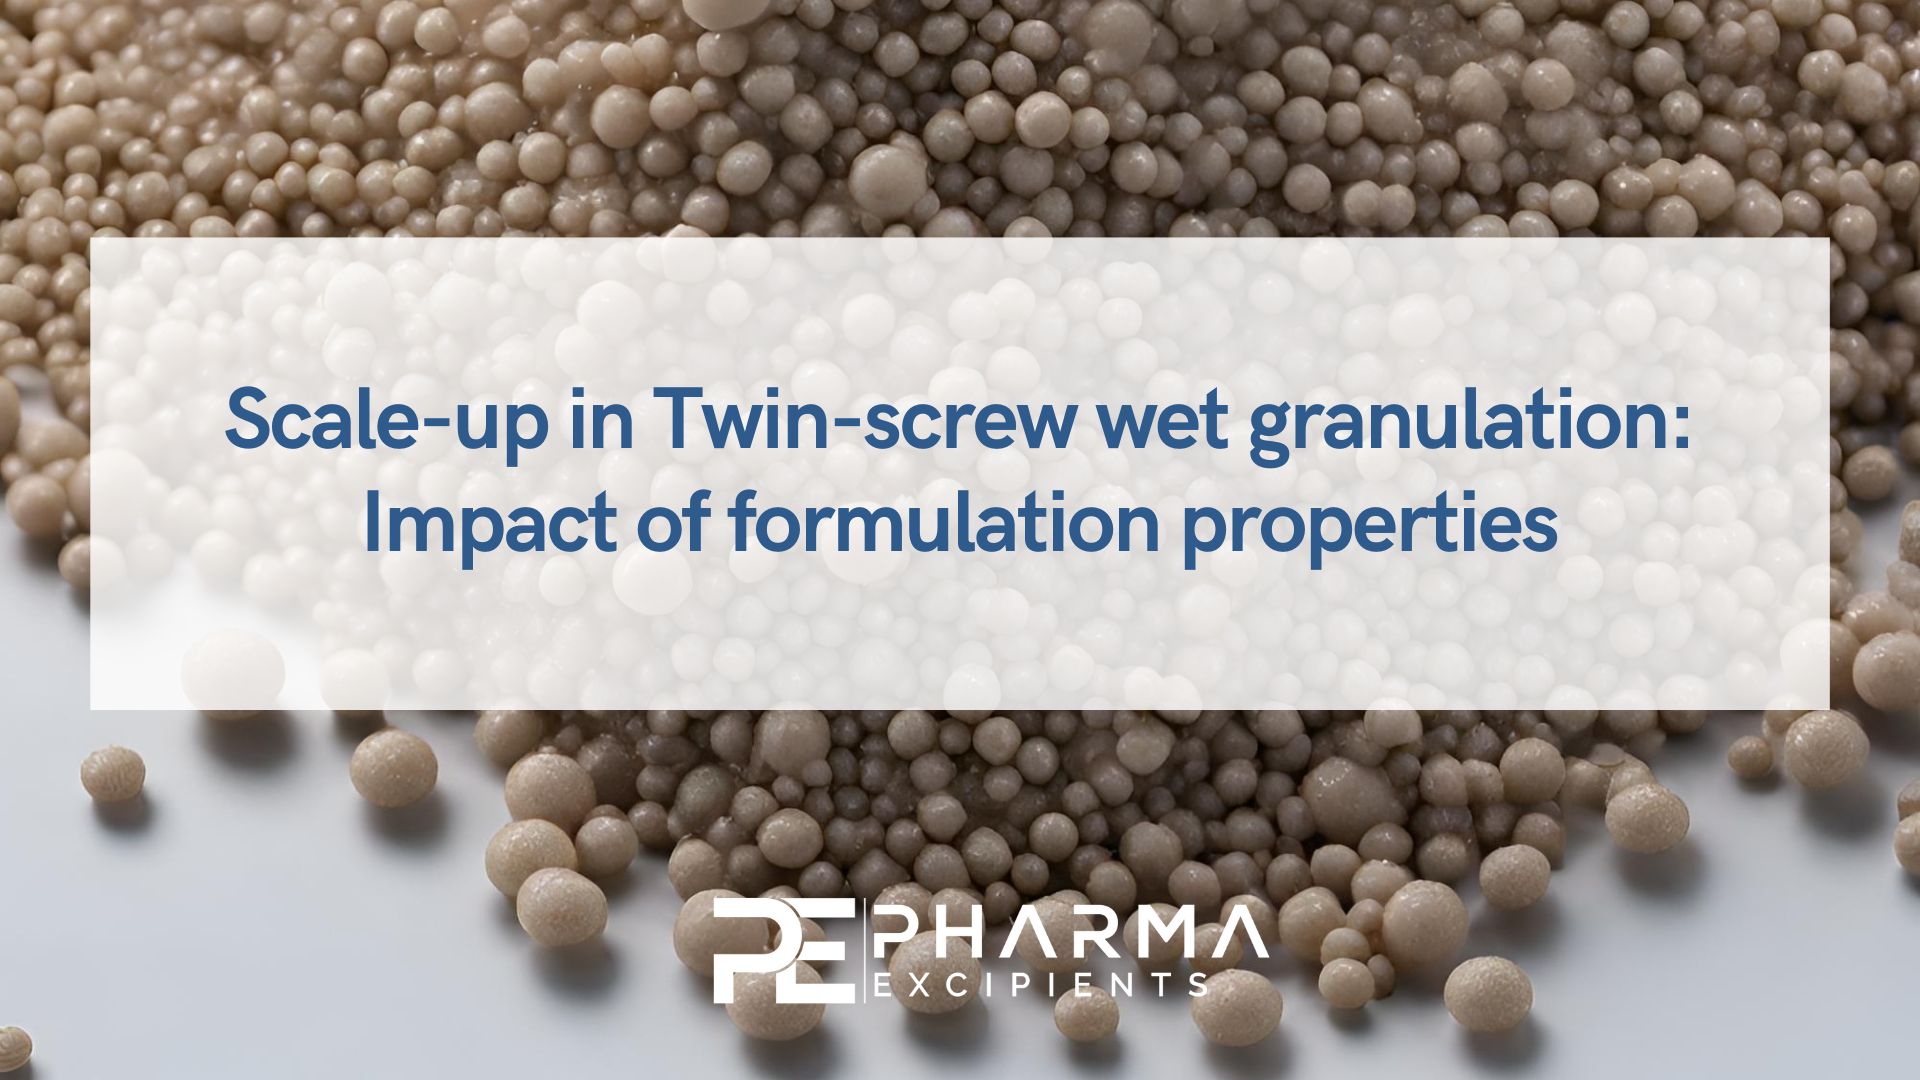 Scale-up in Twin-screw wet granulation: Impact of formulation properties